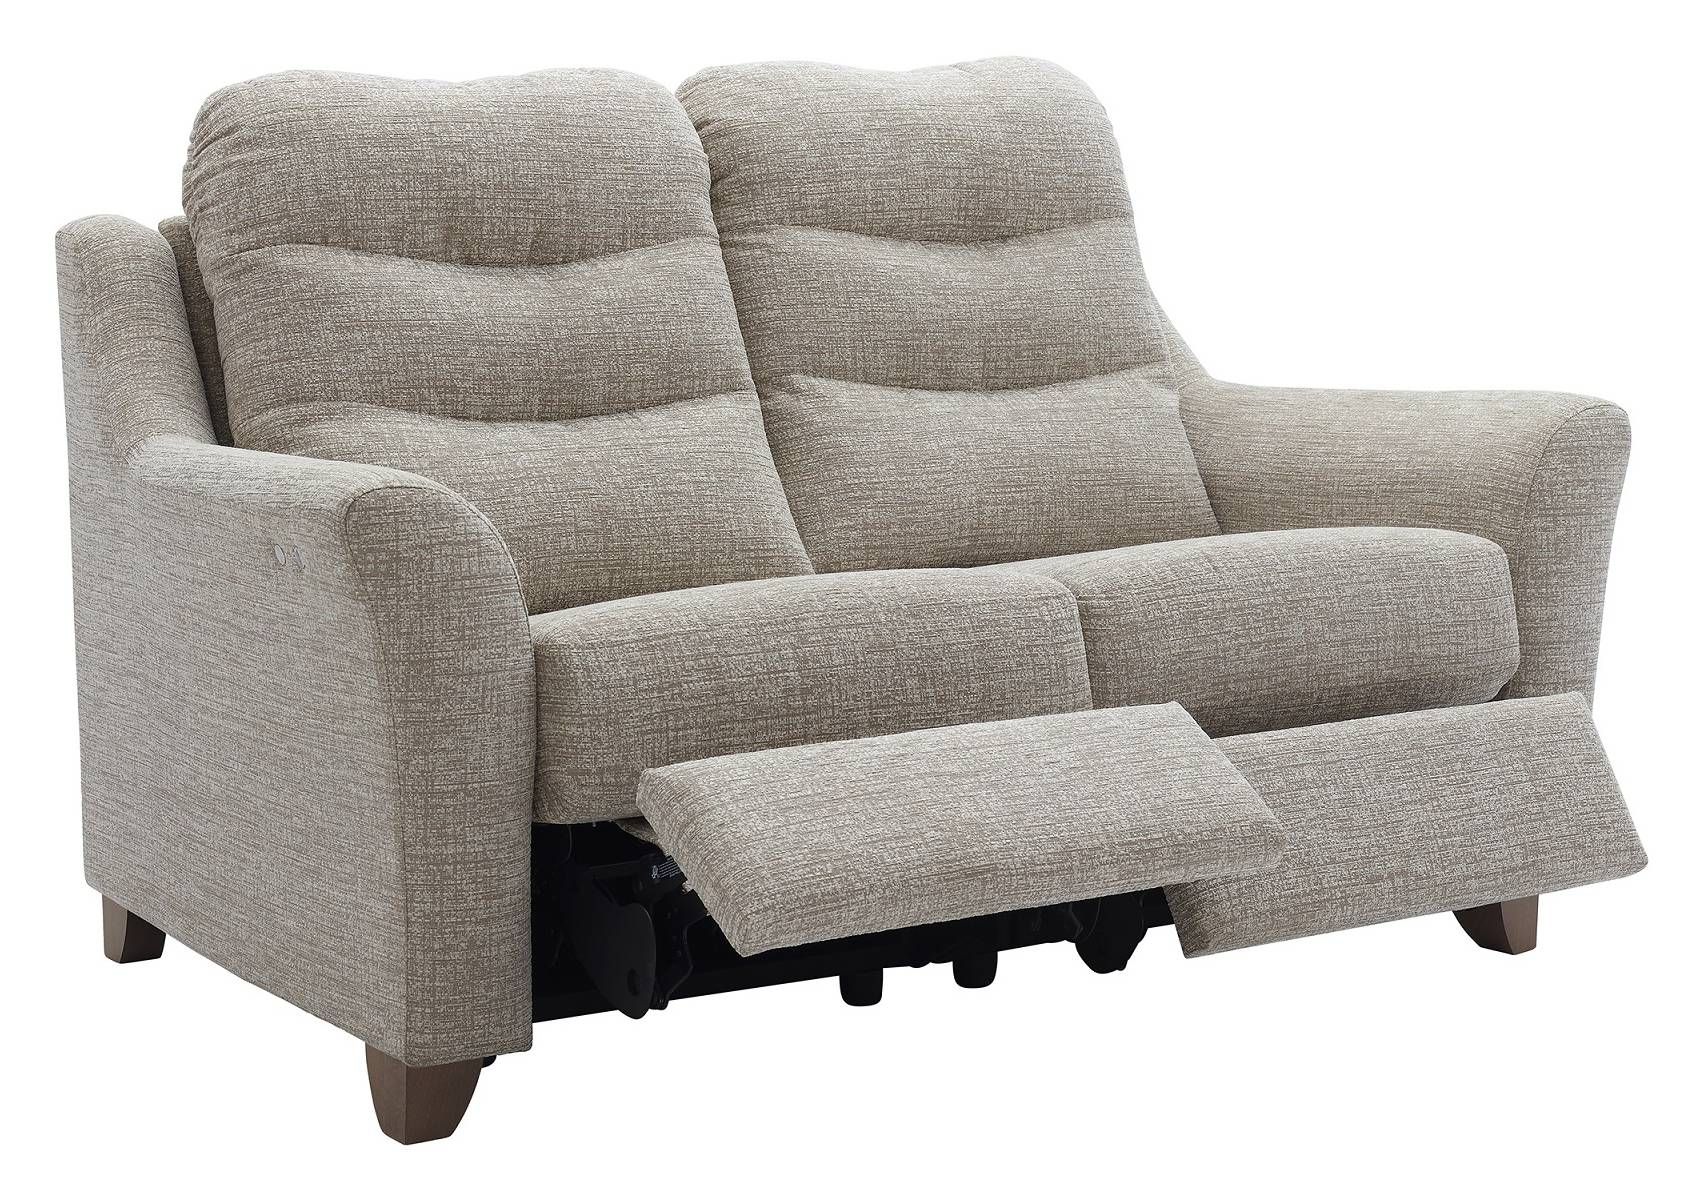 G Plan Tate Fixed & Recliner Sofa |Oldrids & Downtown With Tate Ii Sofa Chairs (View 11 of 20)